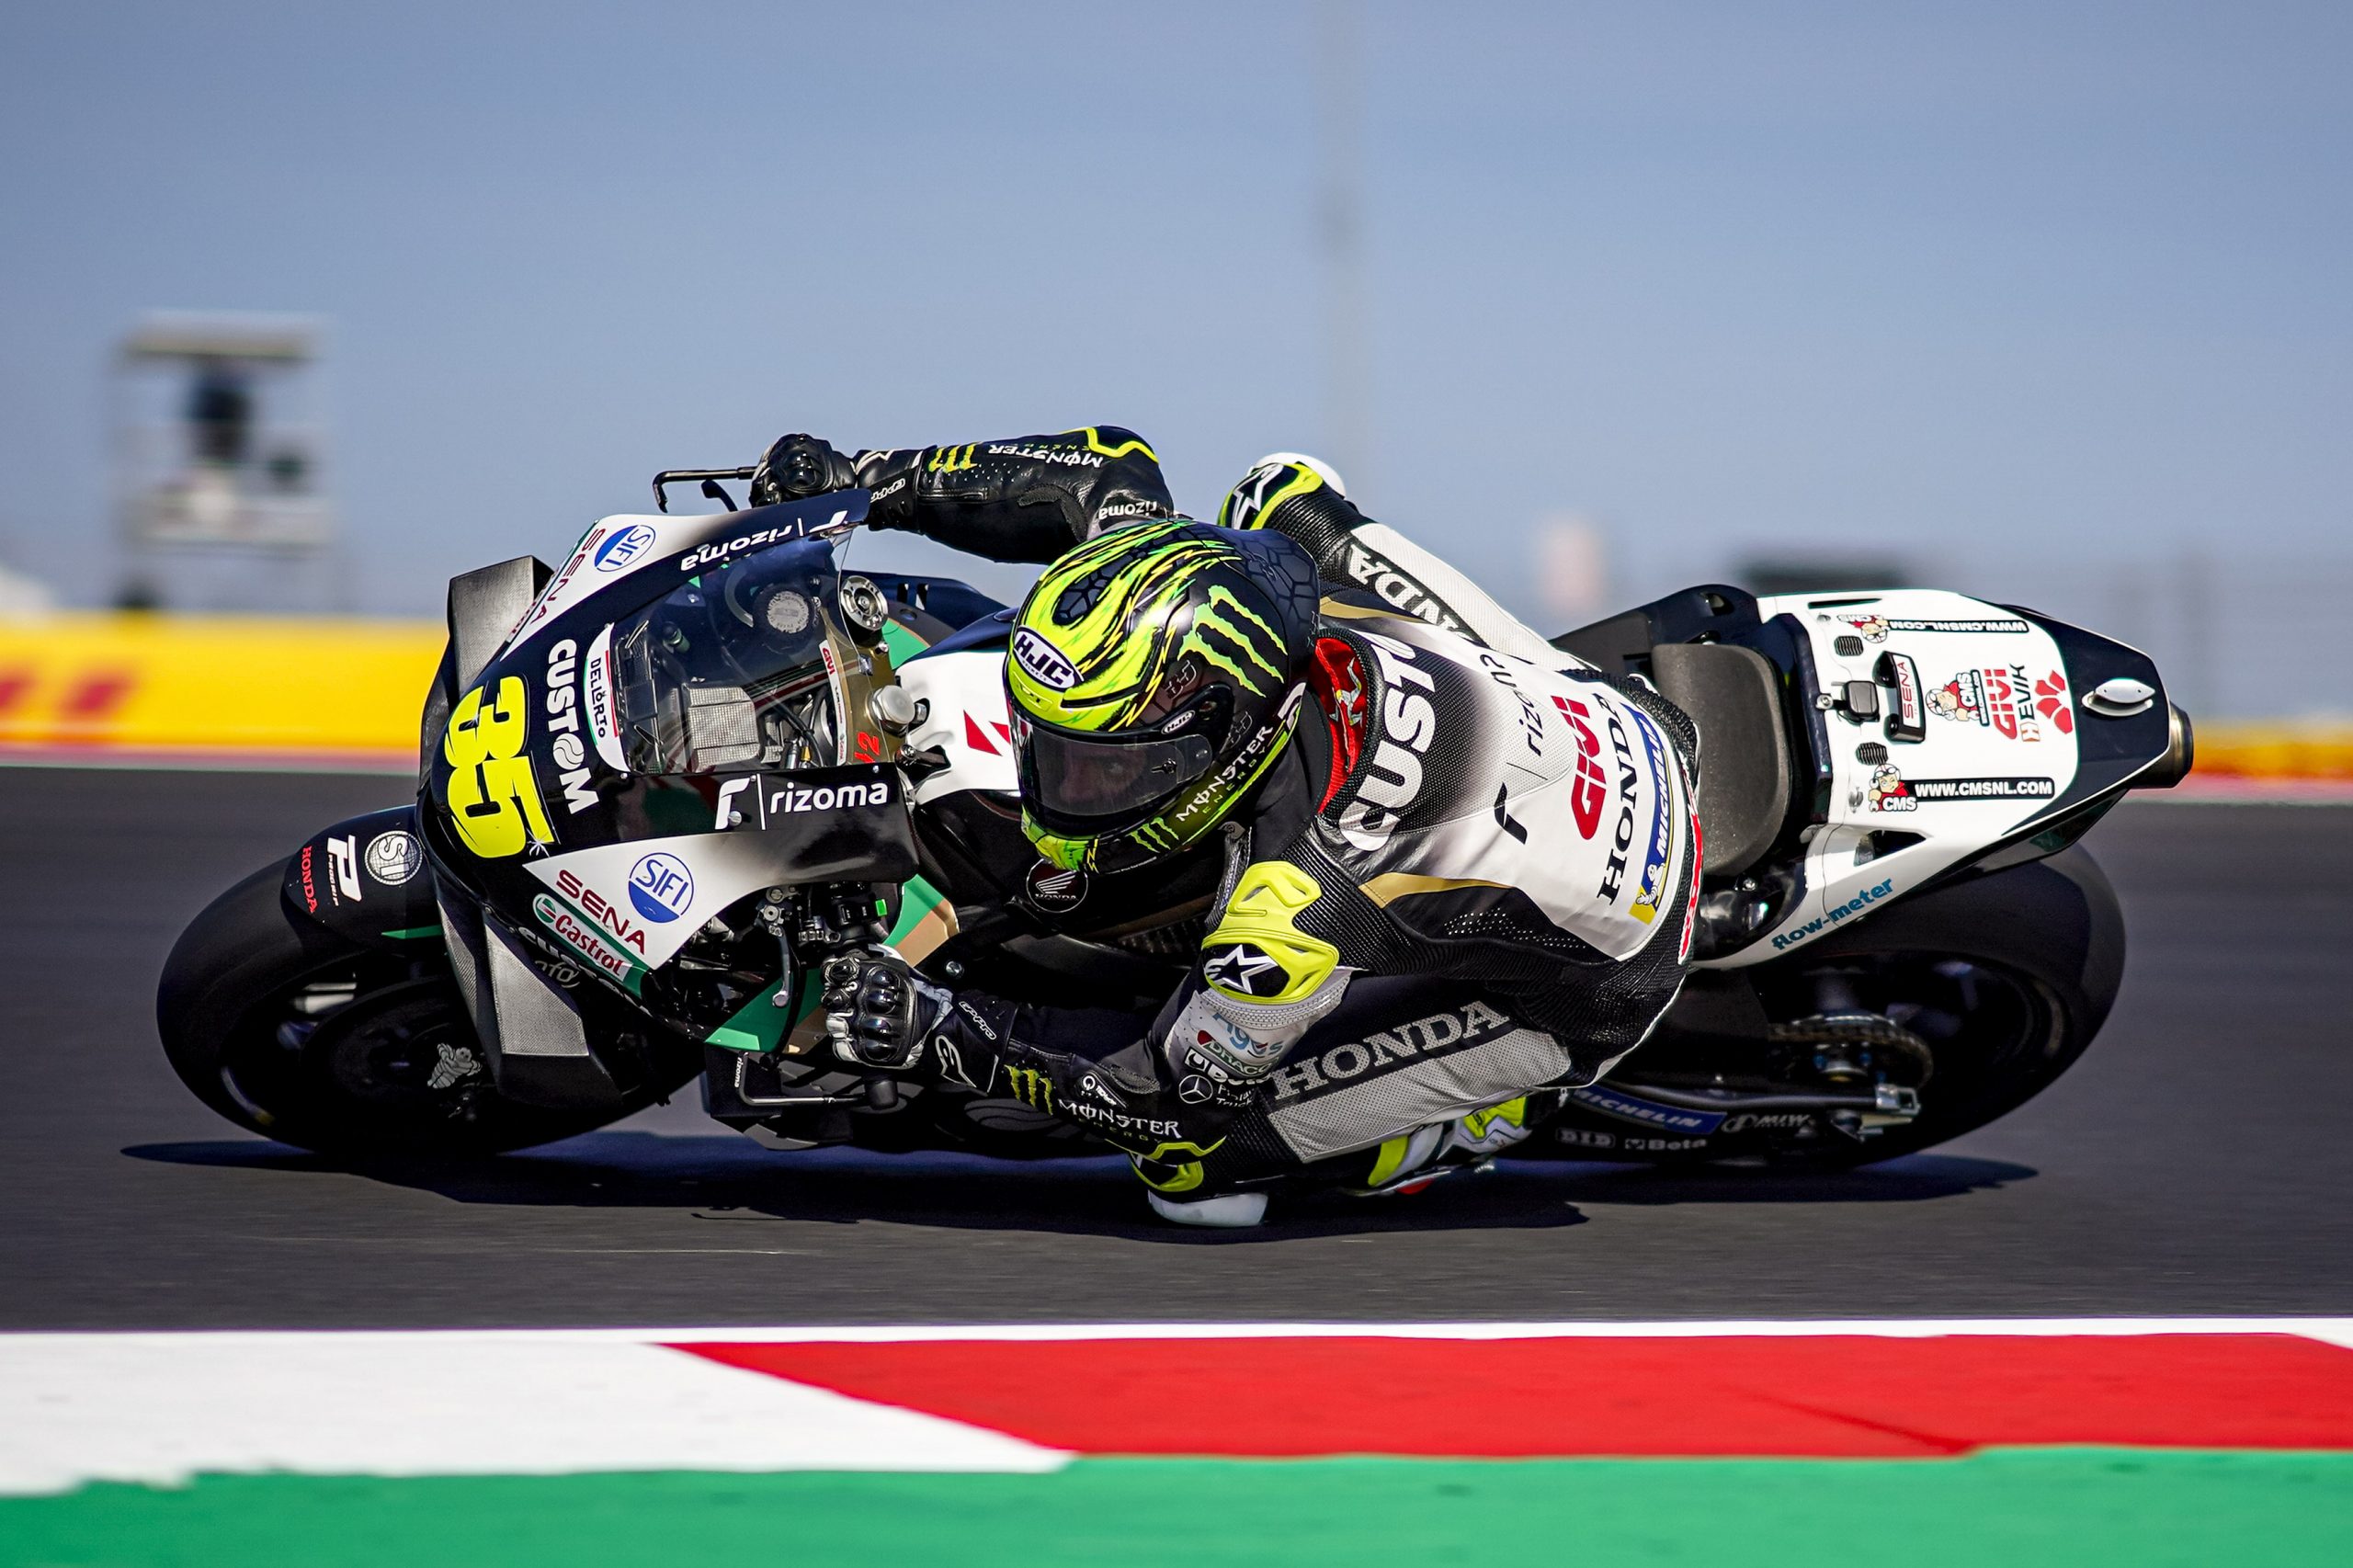 Positive signs for Crutchlow in Misano